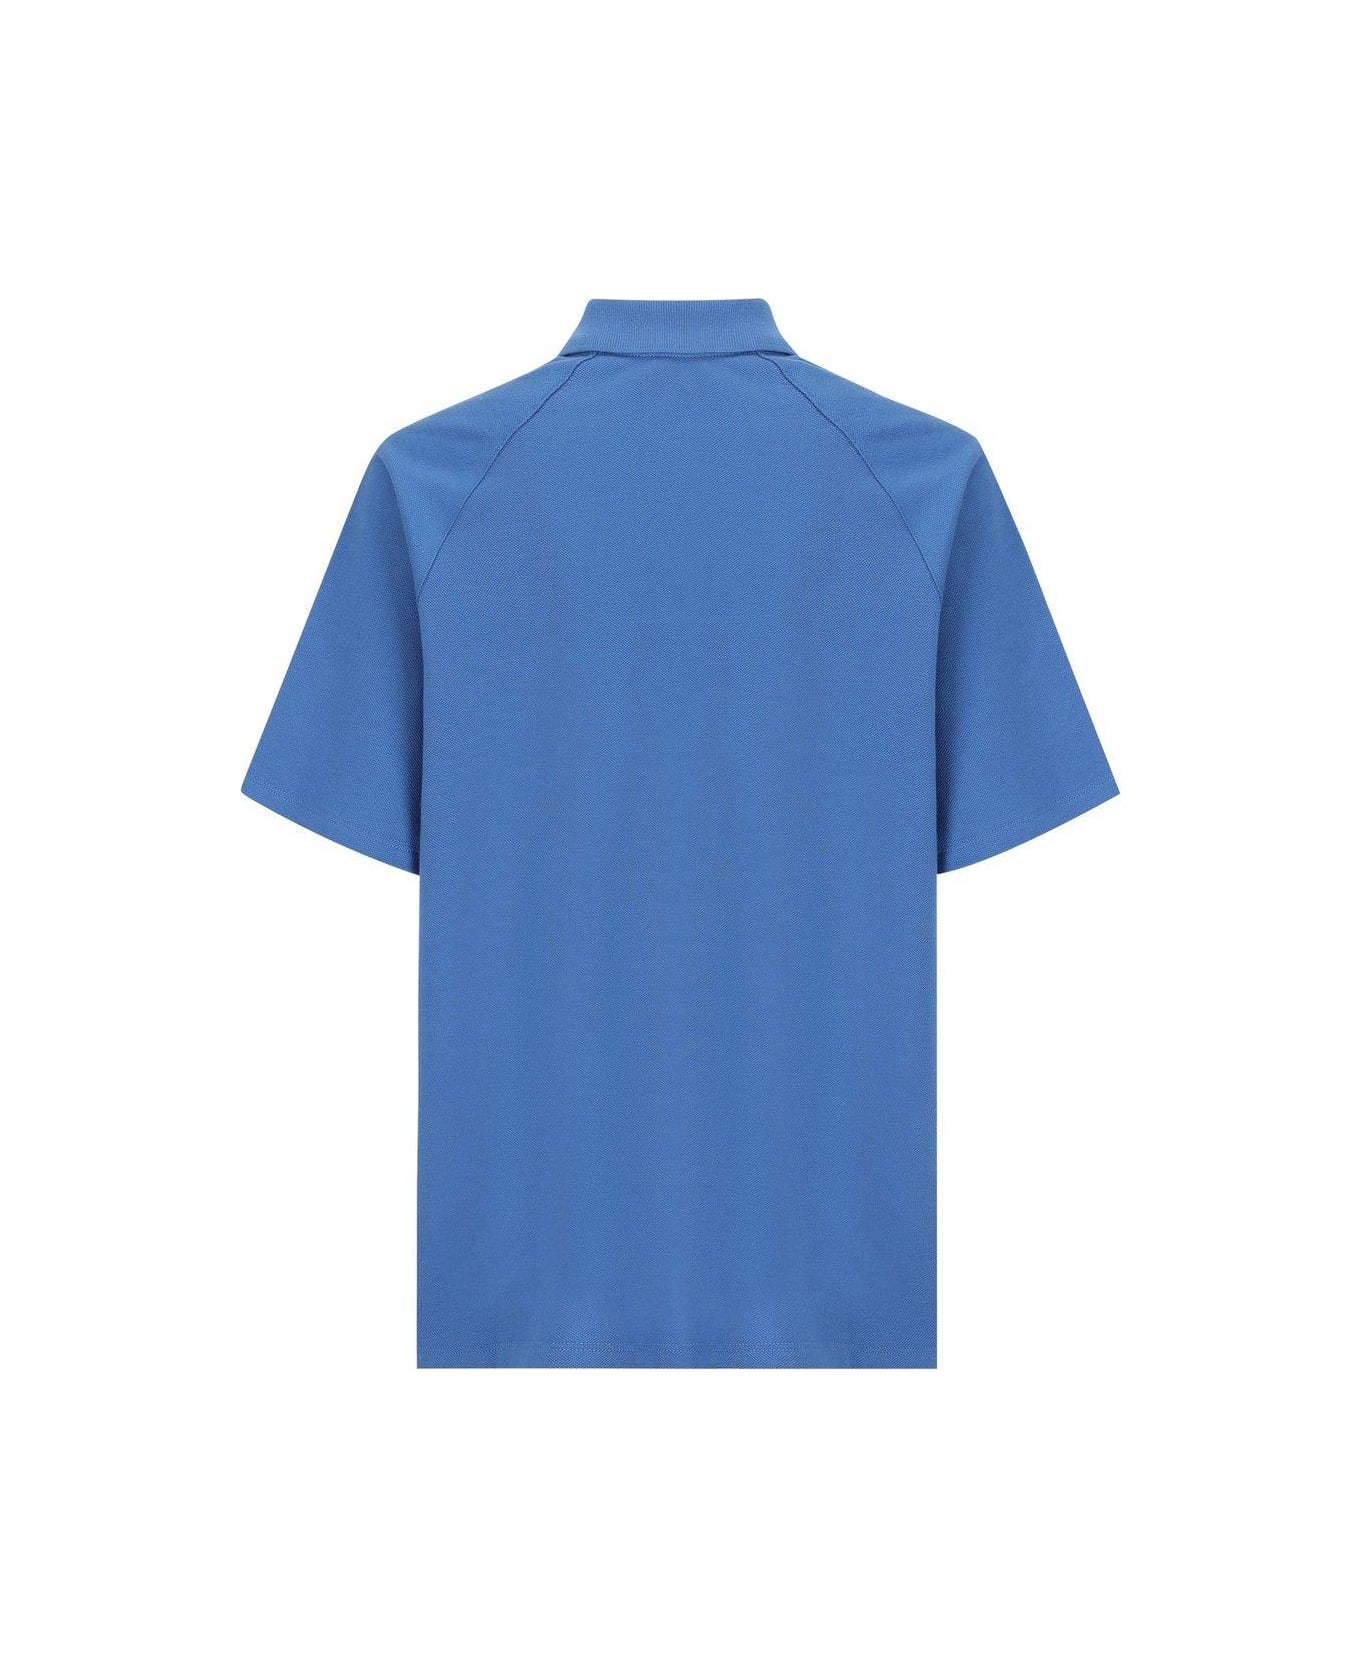 Gucci Logo Patch Short-sleeved Polo Shirt - Blue シャツ